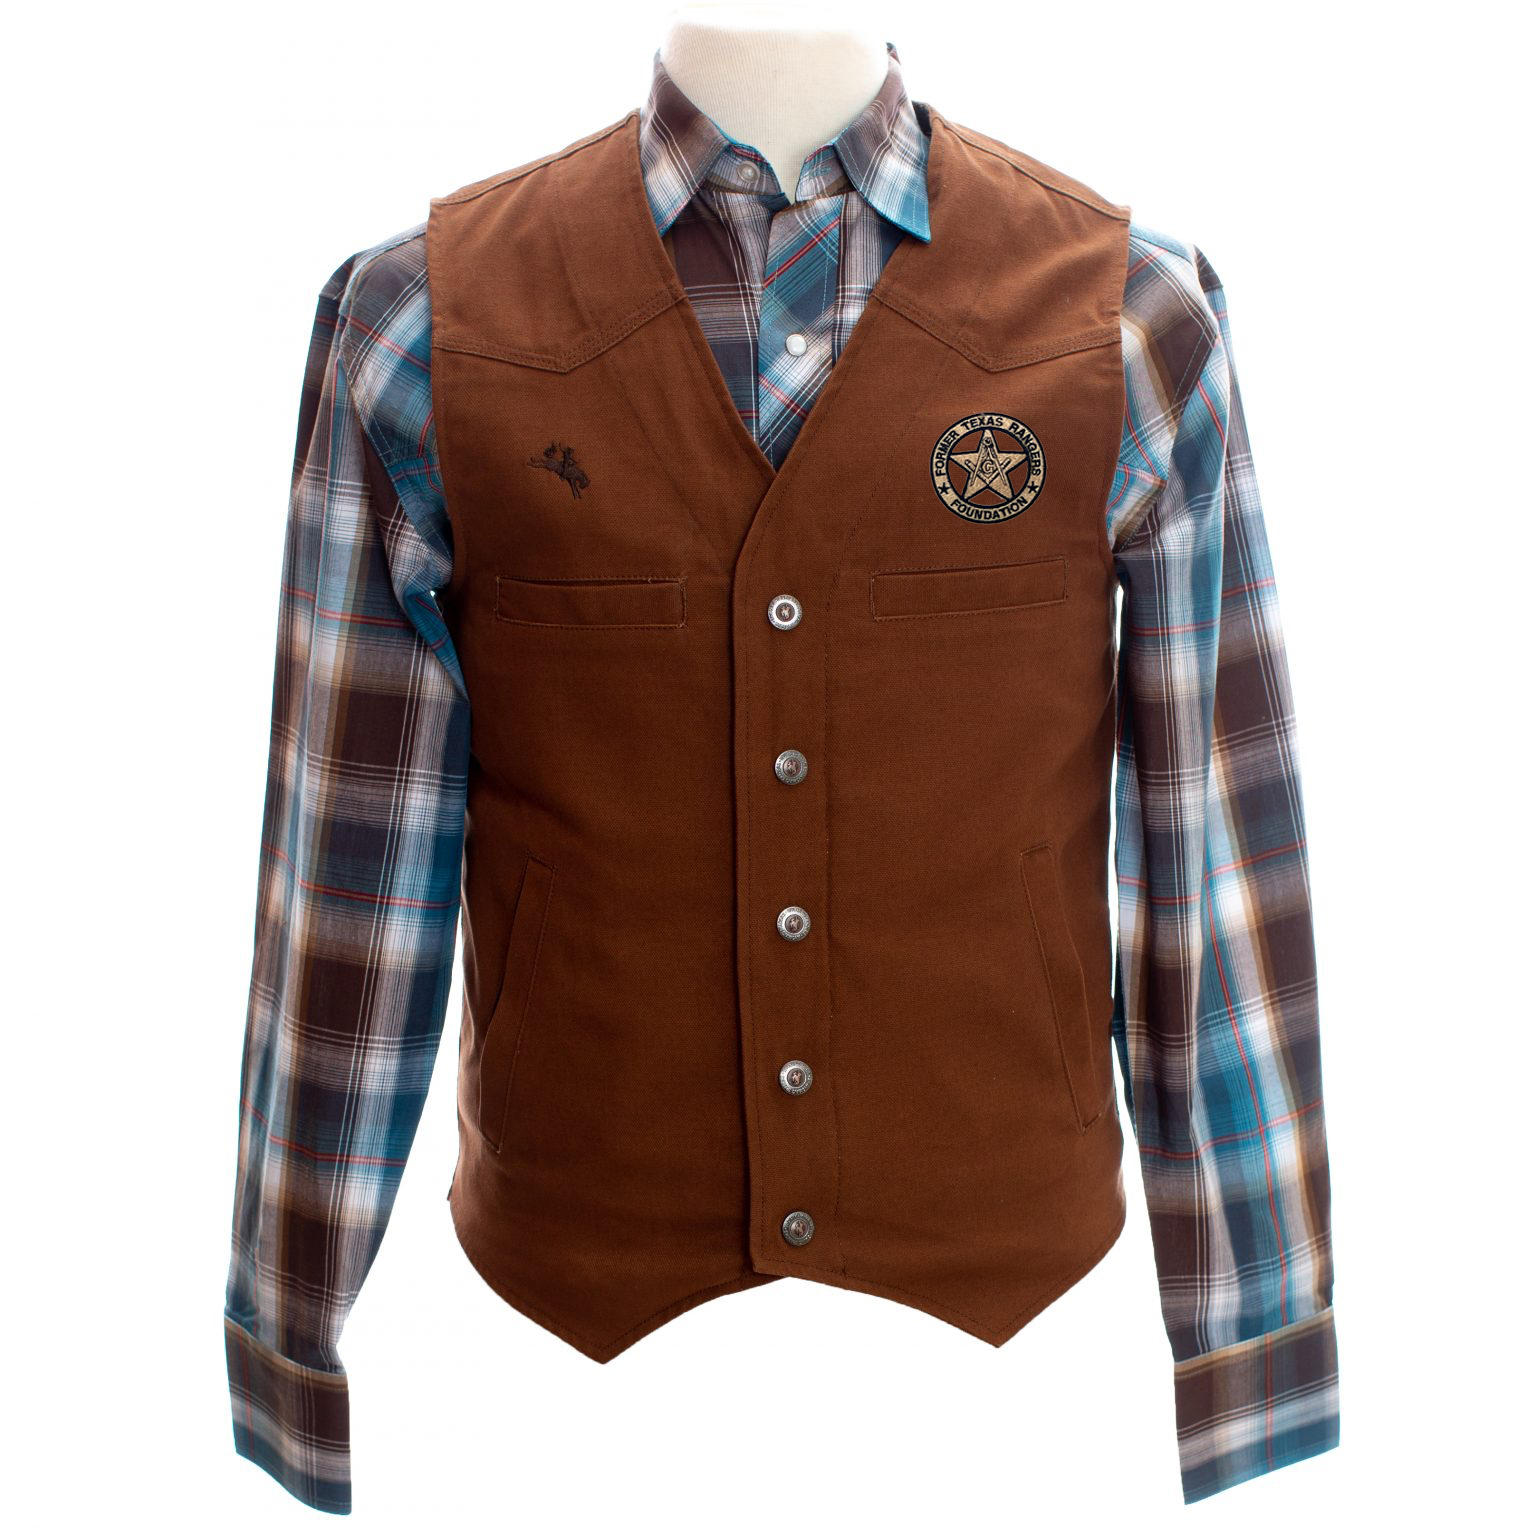 Twill Western Shirt (With Pearl Snaps) - Wyoming Traders